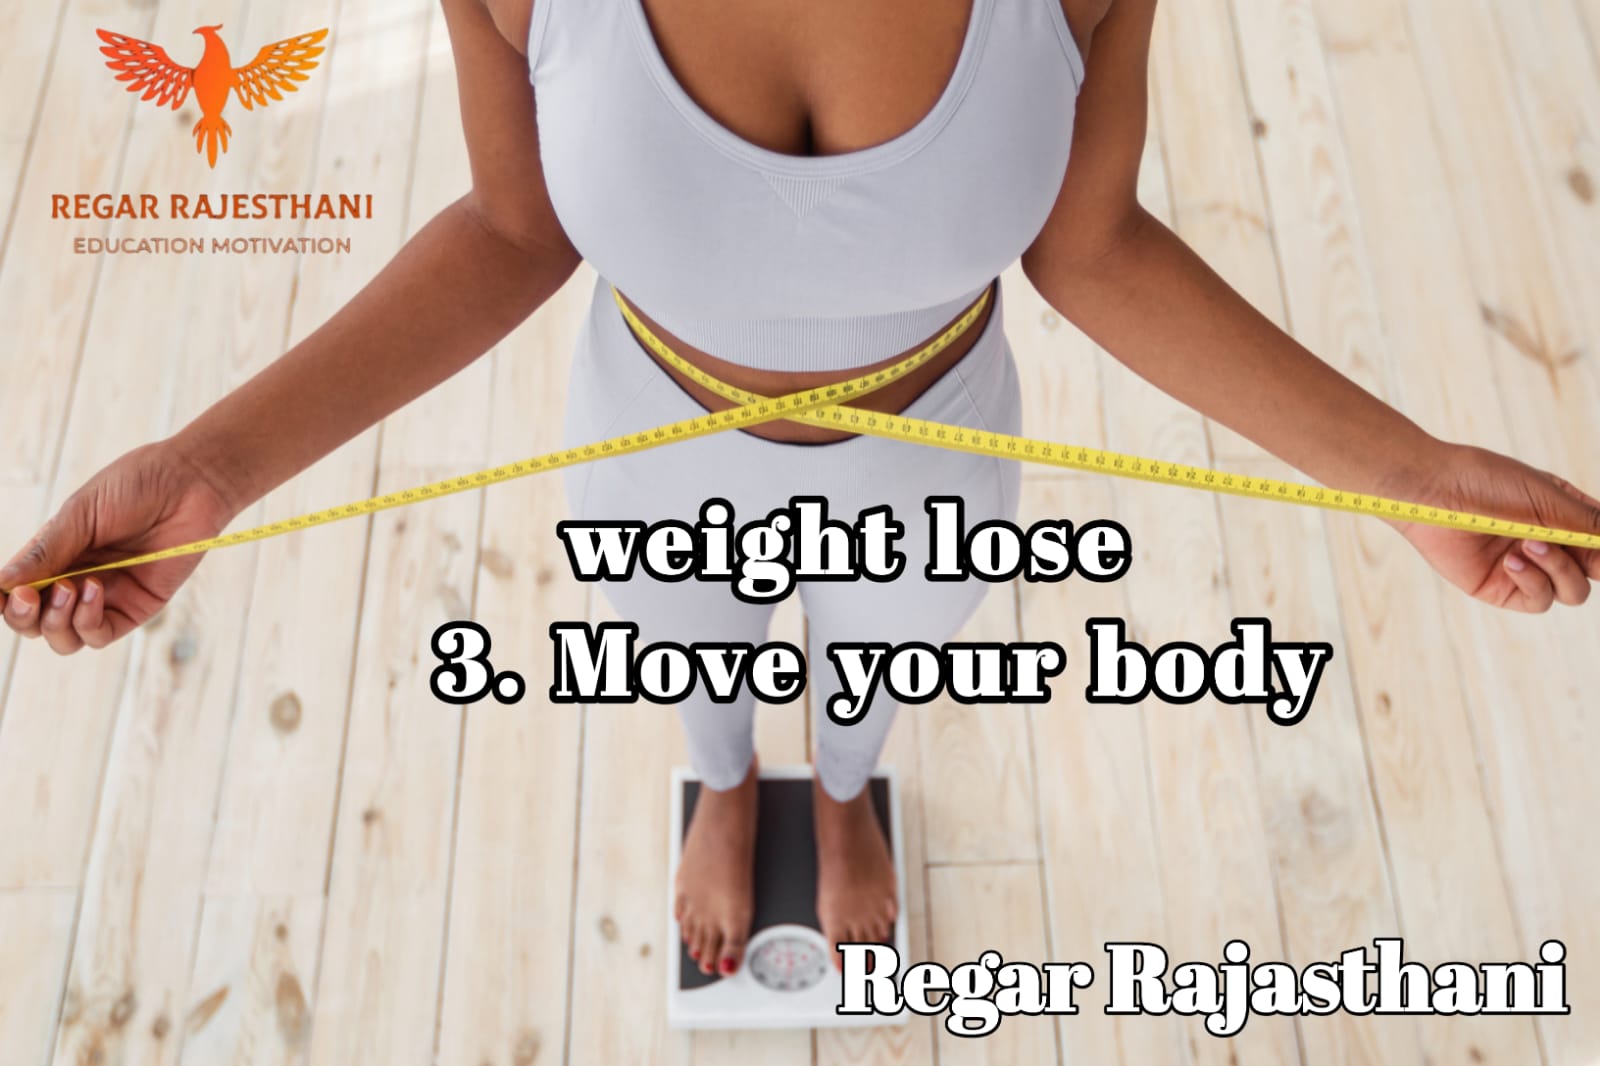 3. Move your body, WEIGHT LOOSE